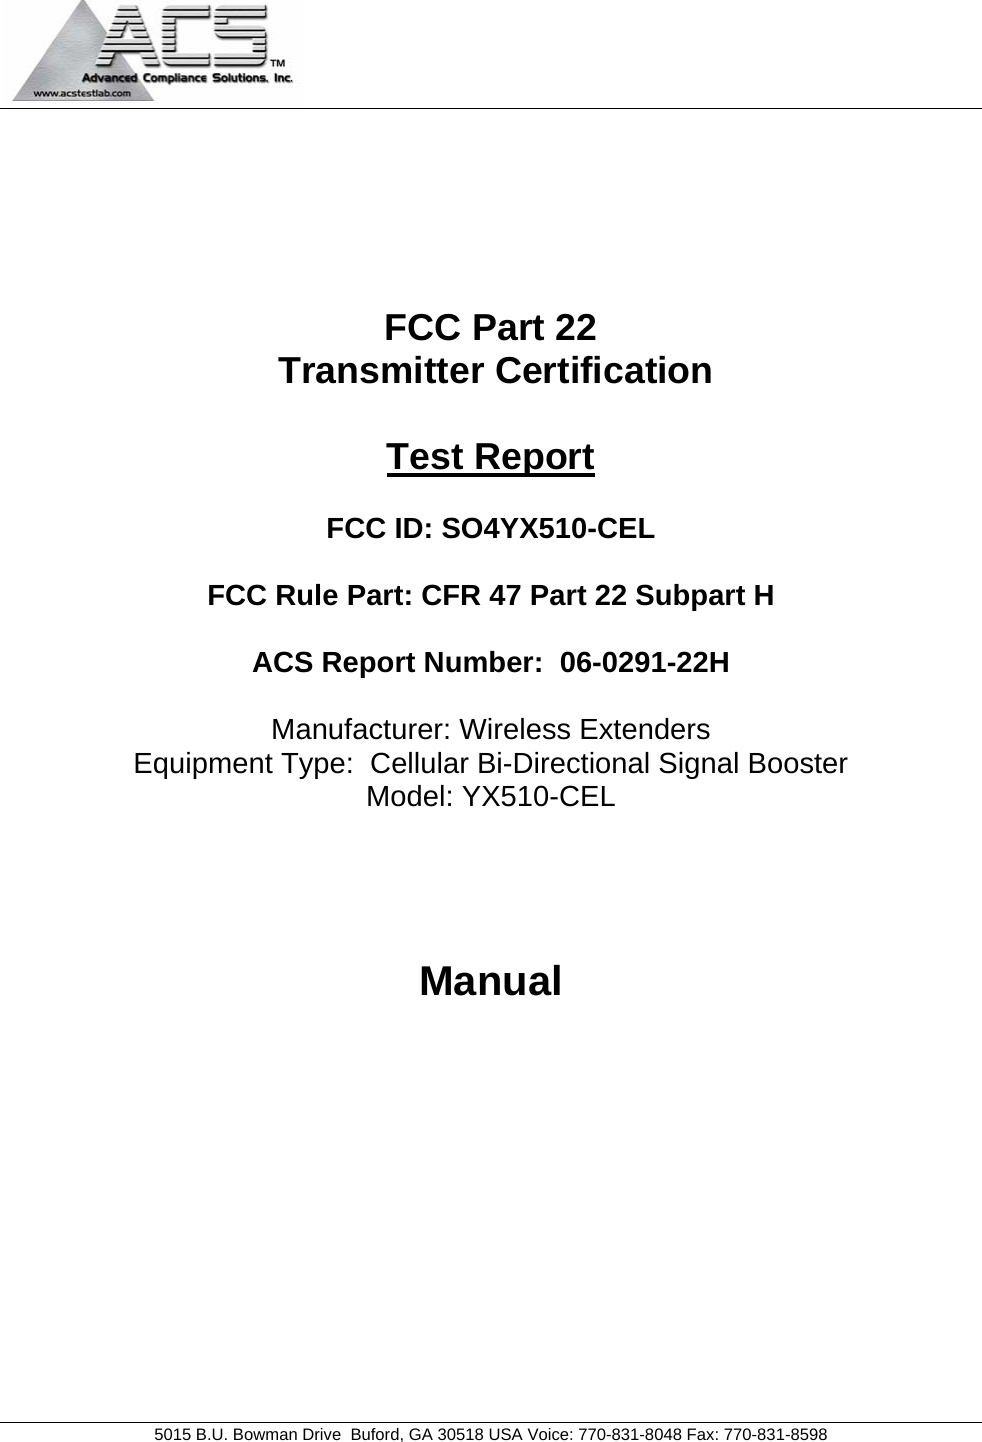                                            5015 B.U. Bowman Drive  Buford, GA 30518 USA Voice: 770-831-8048 Fax: 770-831-8598       FCC Part 22  Transmitter Certification  Test Report  FCC ID: SO4YX510-CEL  FCC Rule Part: CFR 47 Part 22 Subpart H  ACS Report Number:  06-0291-22H   Manufacturer: Wireless Extenders Equipment Type:  Cellular Bi-Directional Signal Booster Model: YX510-CEL     Manual 